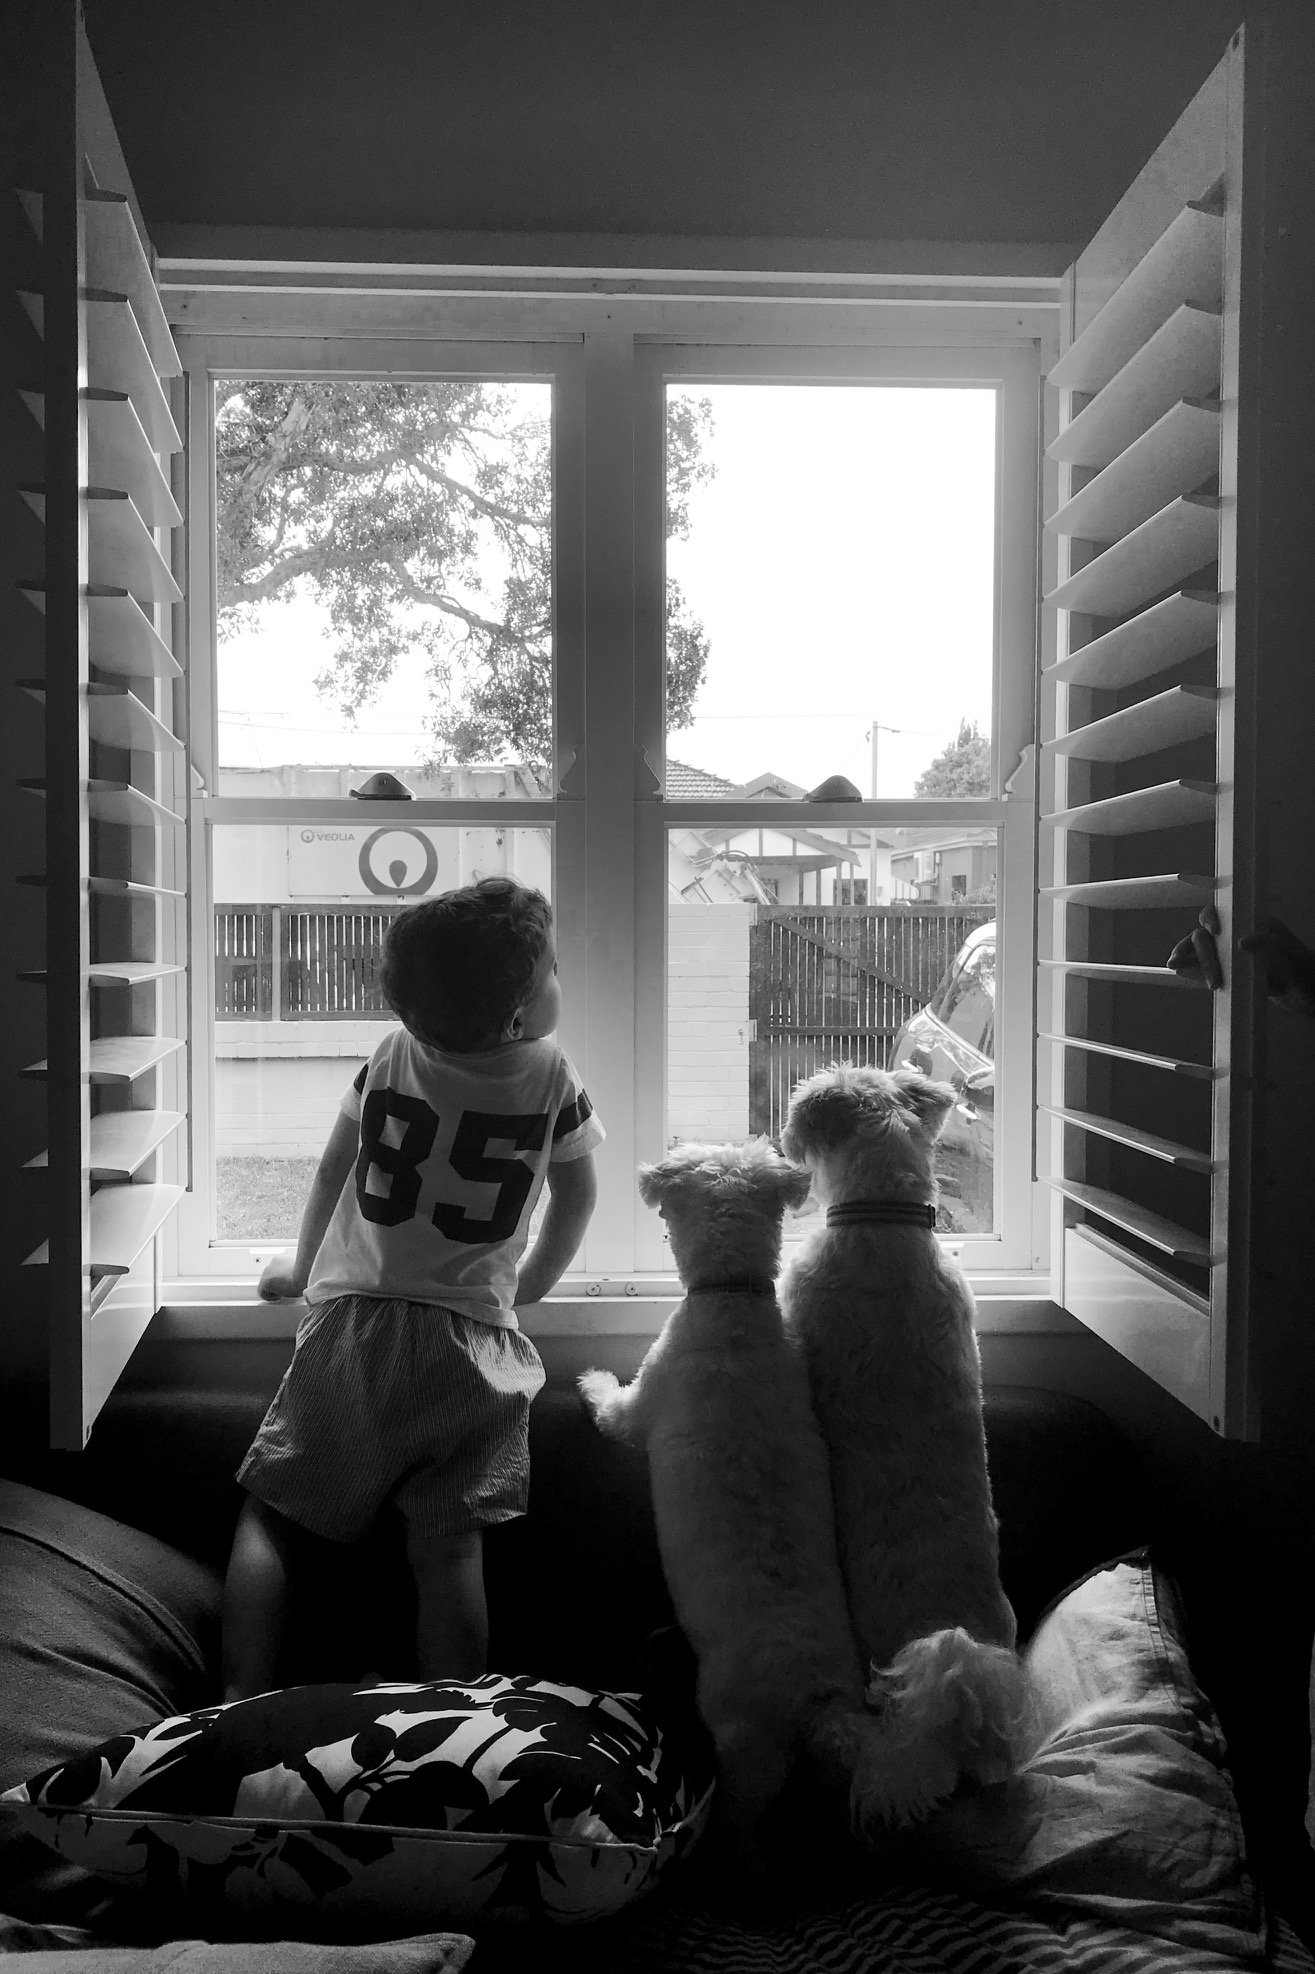 Daydreaming at the window in black and white